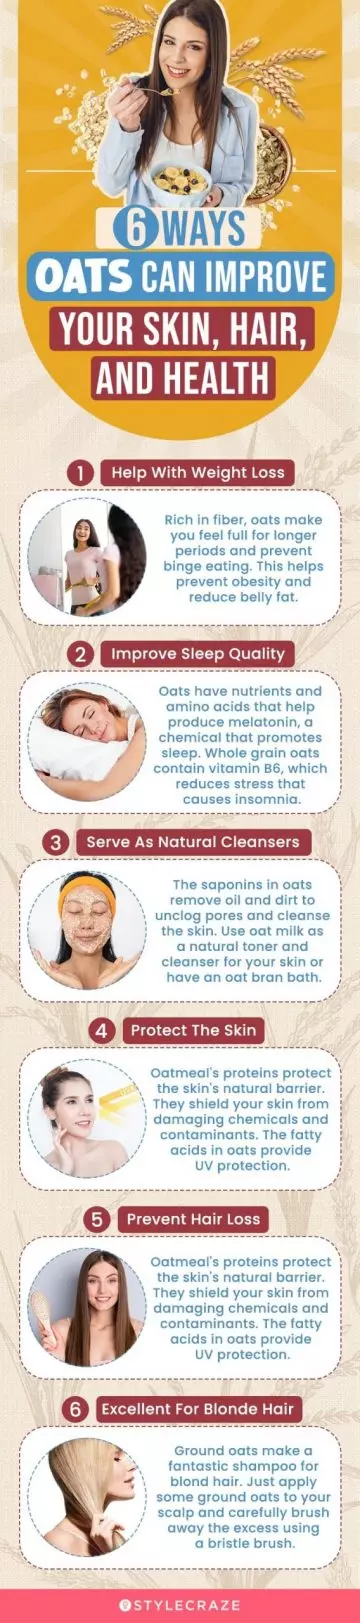 6 ways oats can improve your skin, hair, and health (infographic)